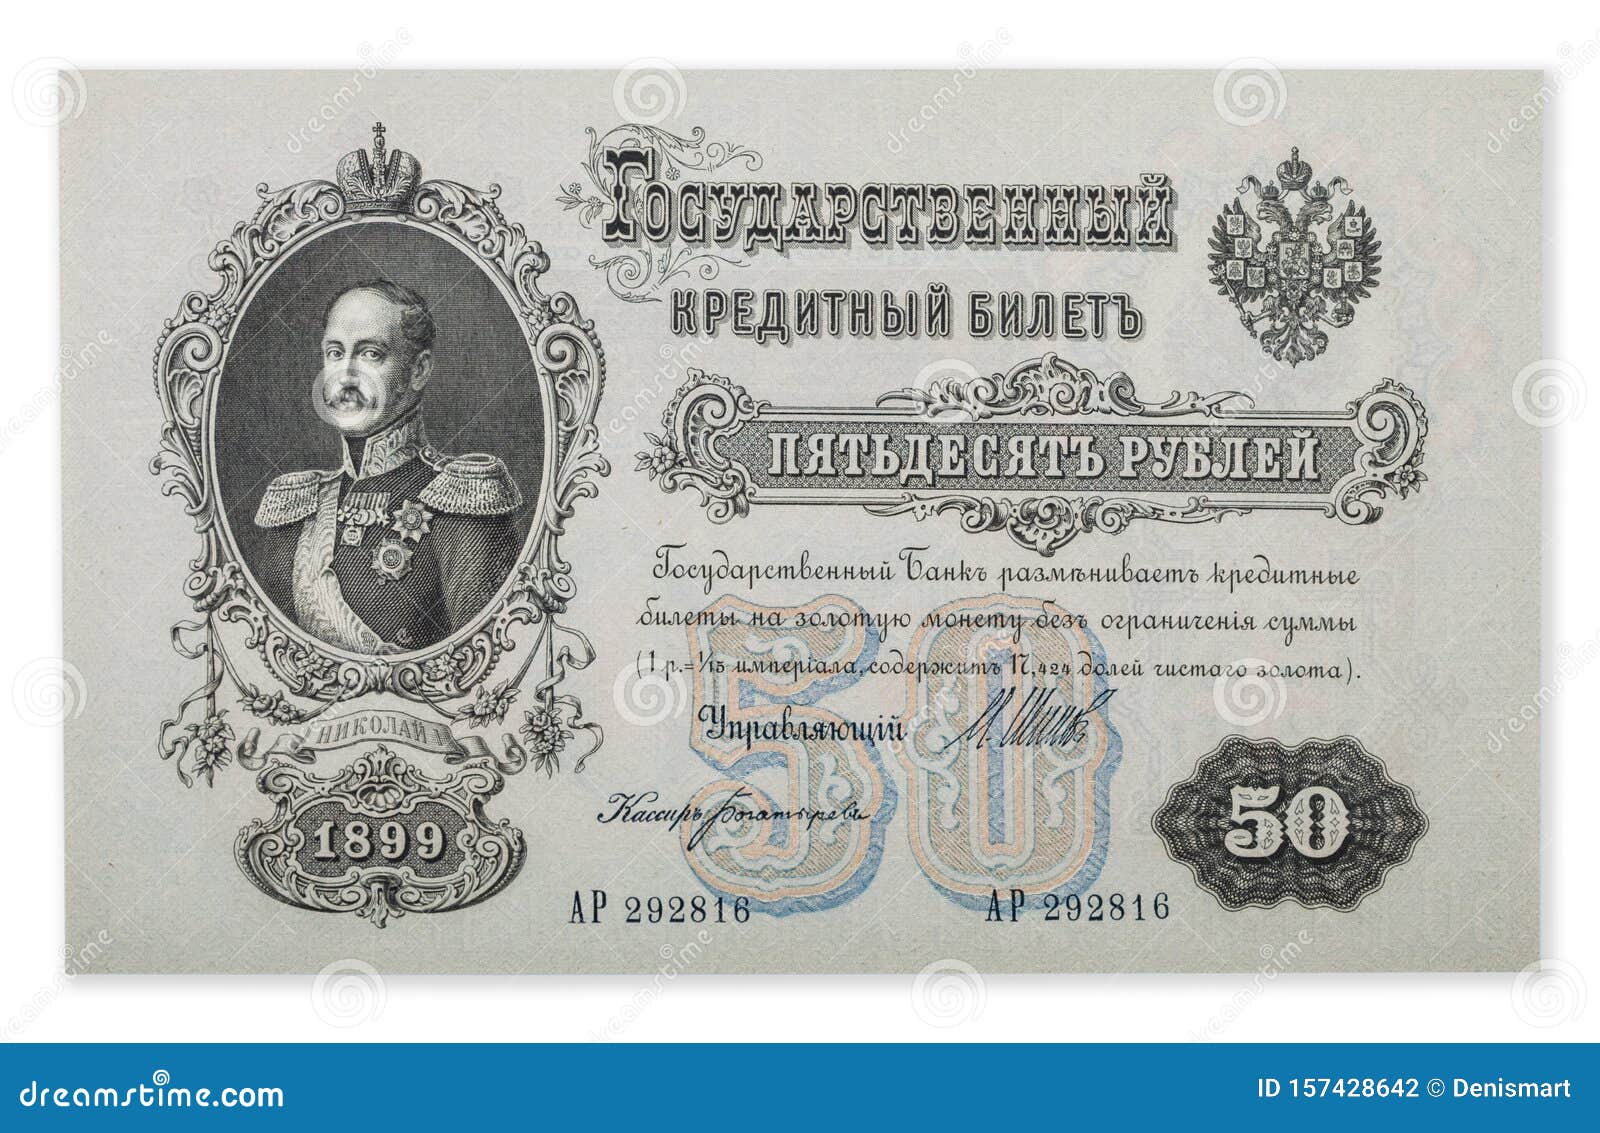 Imperial Russian Paper Money  3 Three  Rouble Ruble Note 1905  Nicholas II